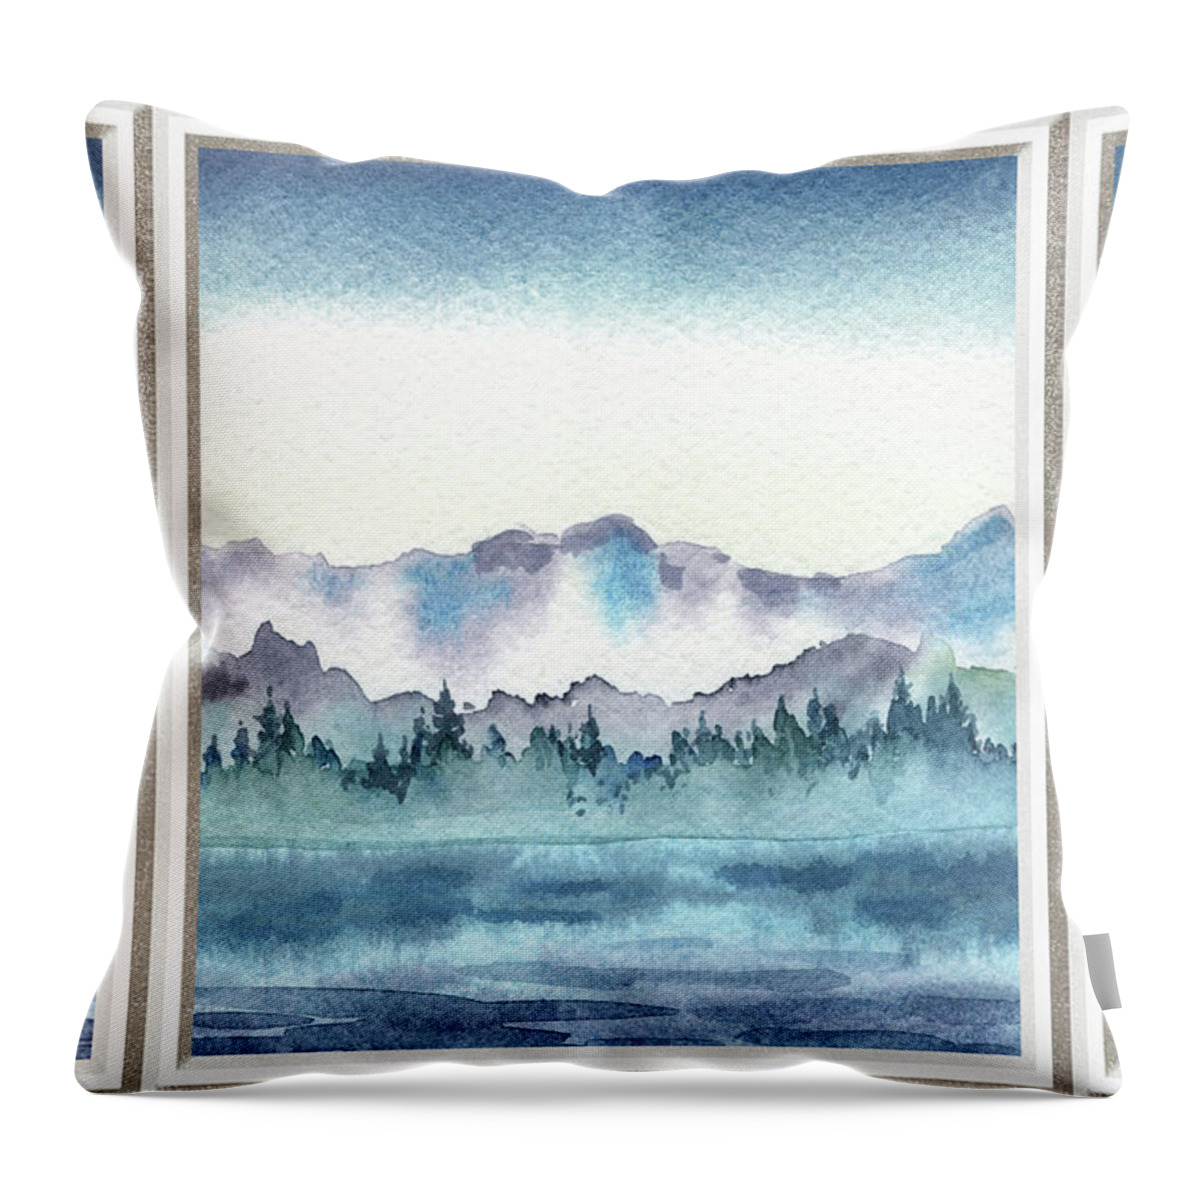 Window View Throw Pillow featuring the painting Lake House Window View Meditative Landscape With Calm Waters And Hills Watercolor V by Irina Sztukowski